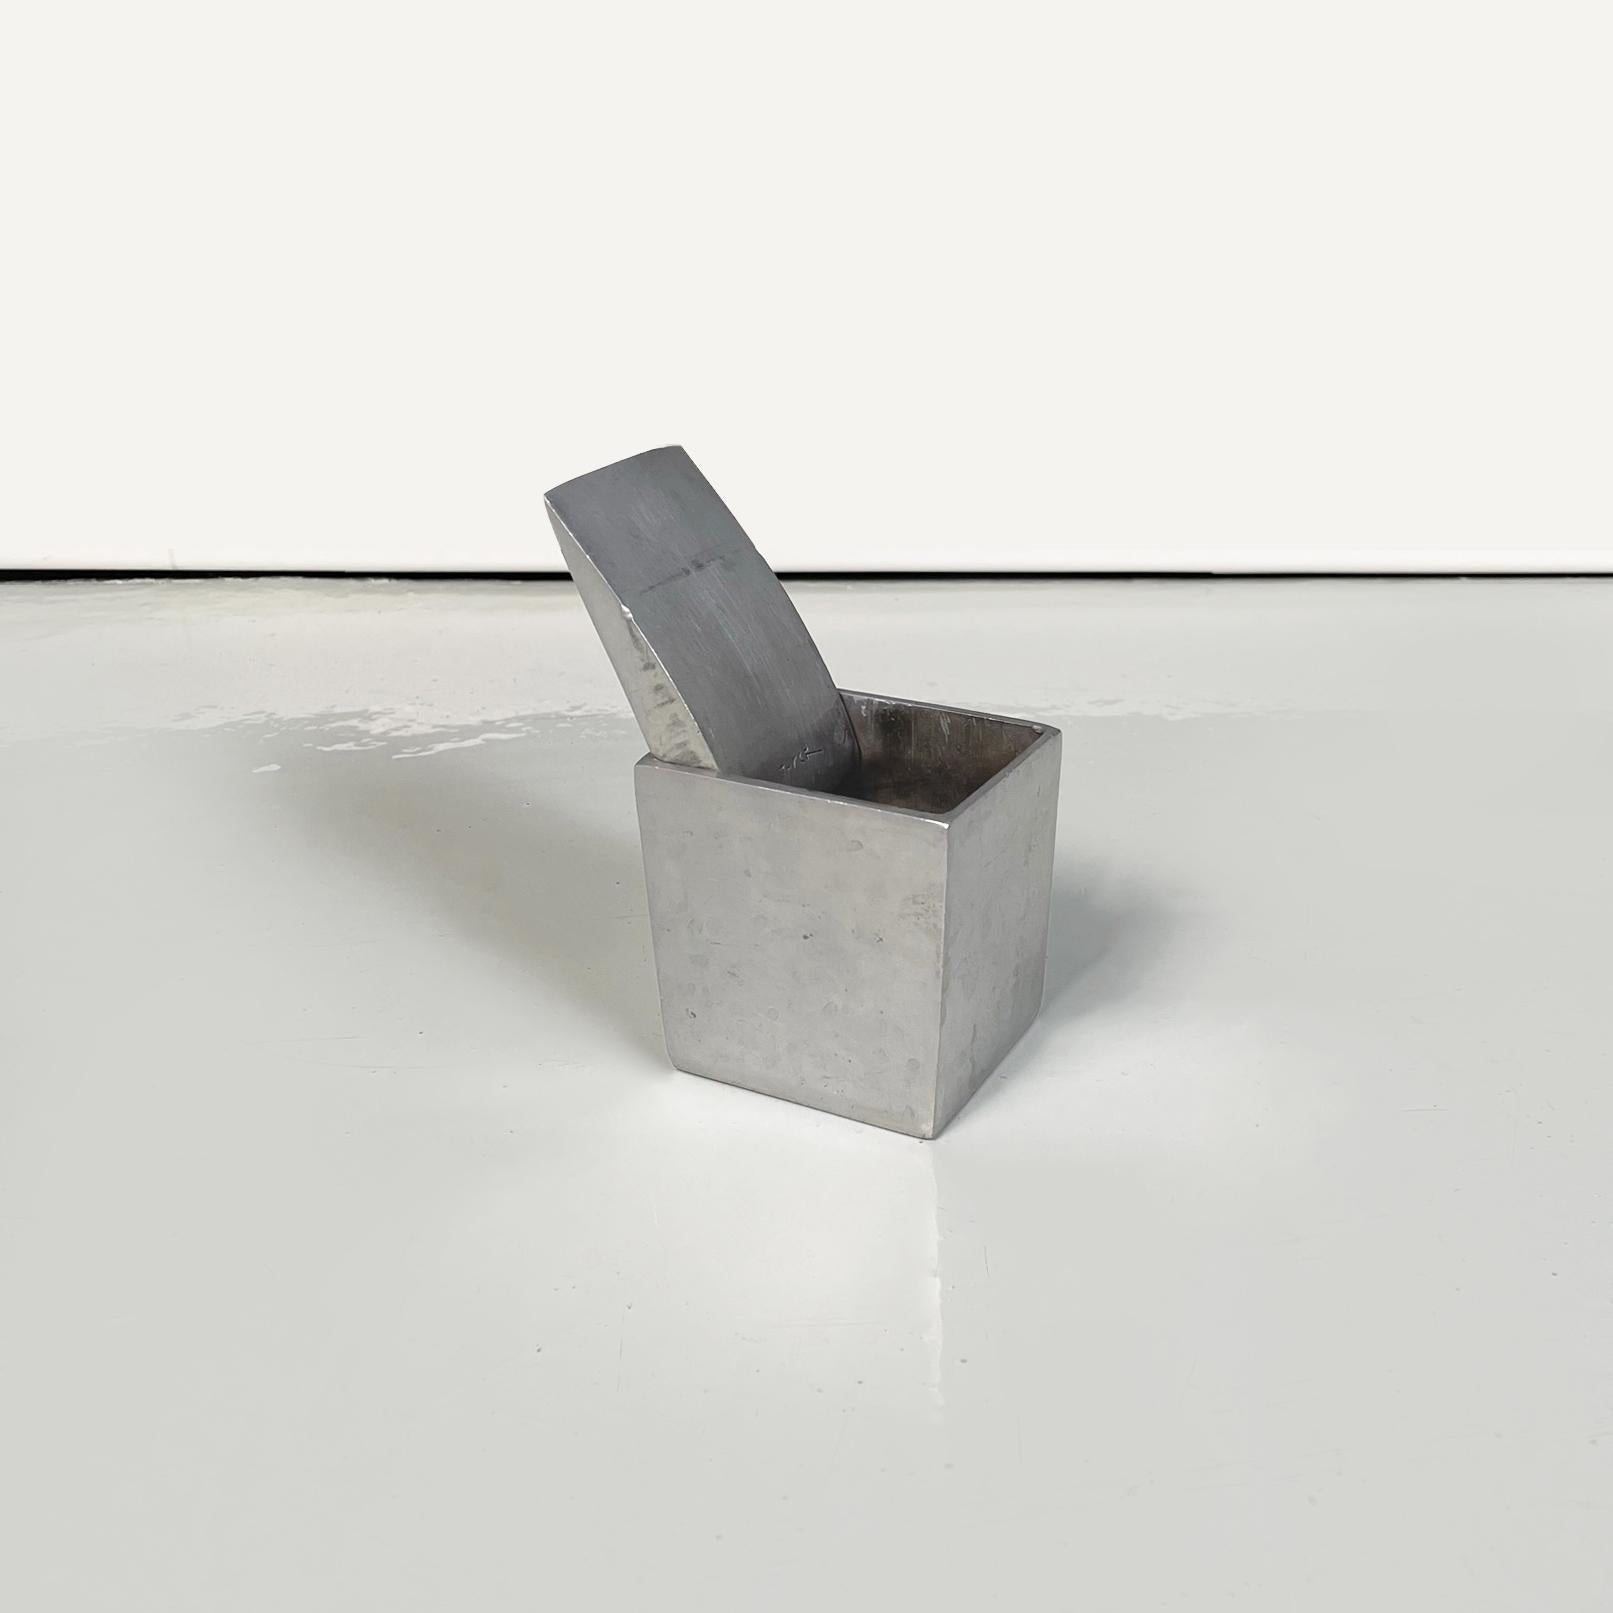 French modern aluminum table ashtray Ray Hollis by Philippe Starck, 1990s
Fantastic and iconic table ashtray mod. Ray Hollis with rectangular aluminum base. The structure tends to shrink towards the bottom. Features a lid on top.
It was produced